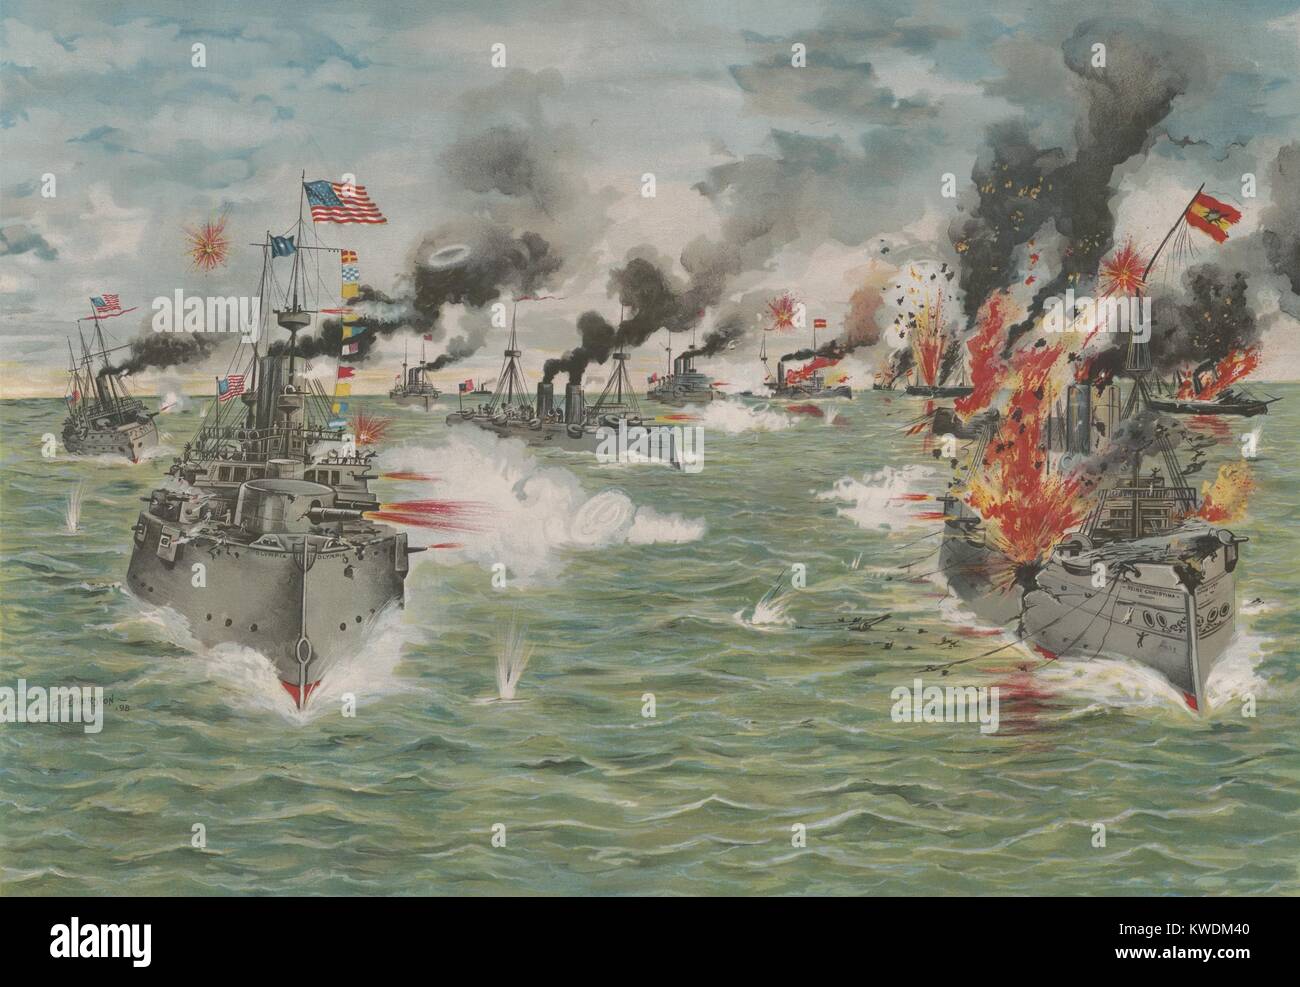 US Asiatic Squadron delivers the last broadside to the Spanish Pacific fleet, May 1, 1898. The Spanish fleet, was outgunned and out-armored by the U.S. fleet in the Battle of Manila Bay. This was the first major battle of the Spanish-American War (BSLOC 2017 10 61) Stock Photo